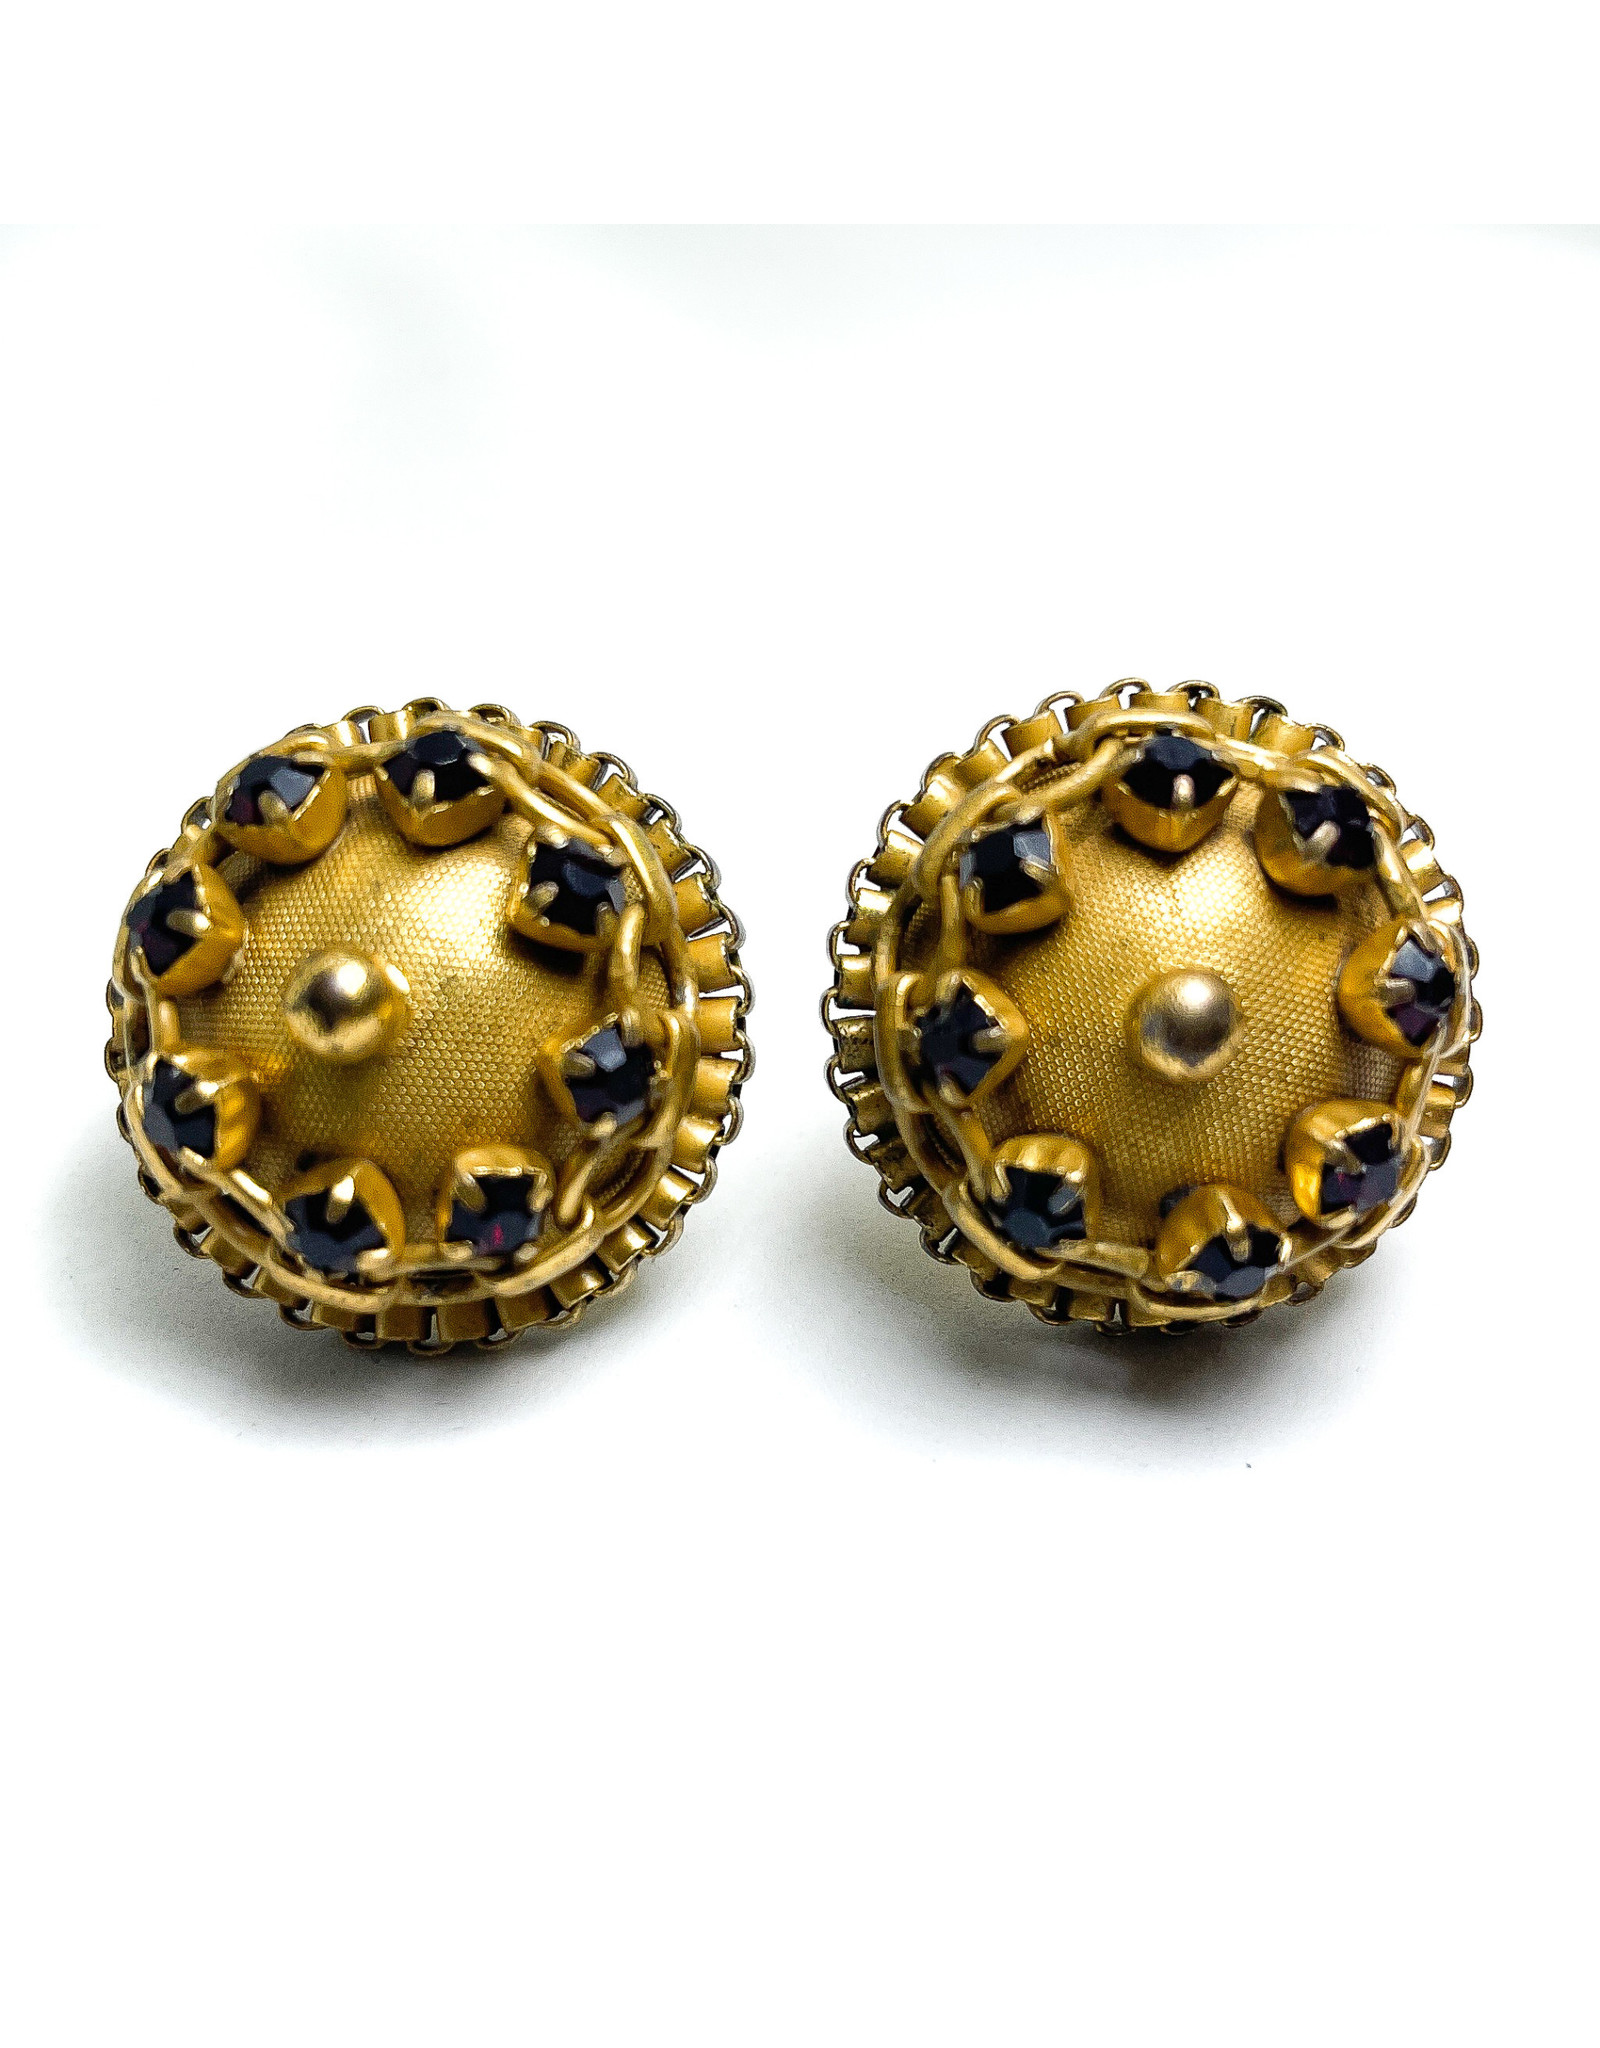 Hobe et Cie. Round Gold-Color Chain Clip Earrings Studded with Garnet-Color Rhinestones